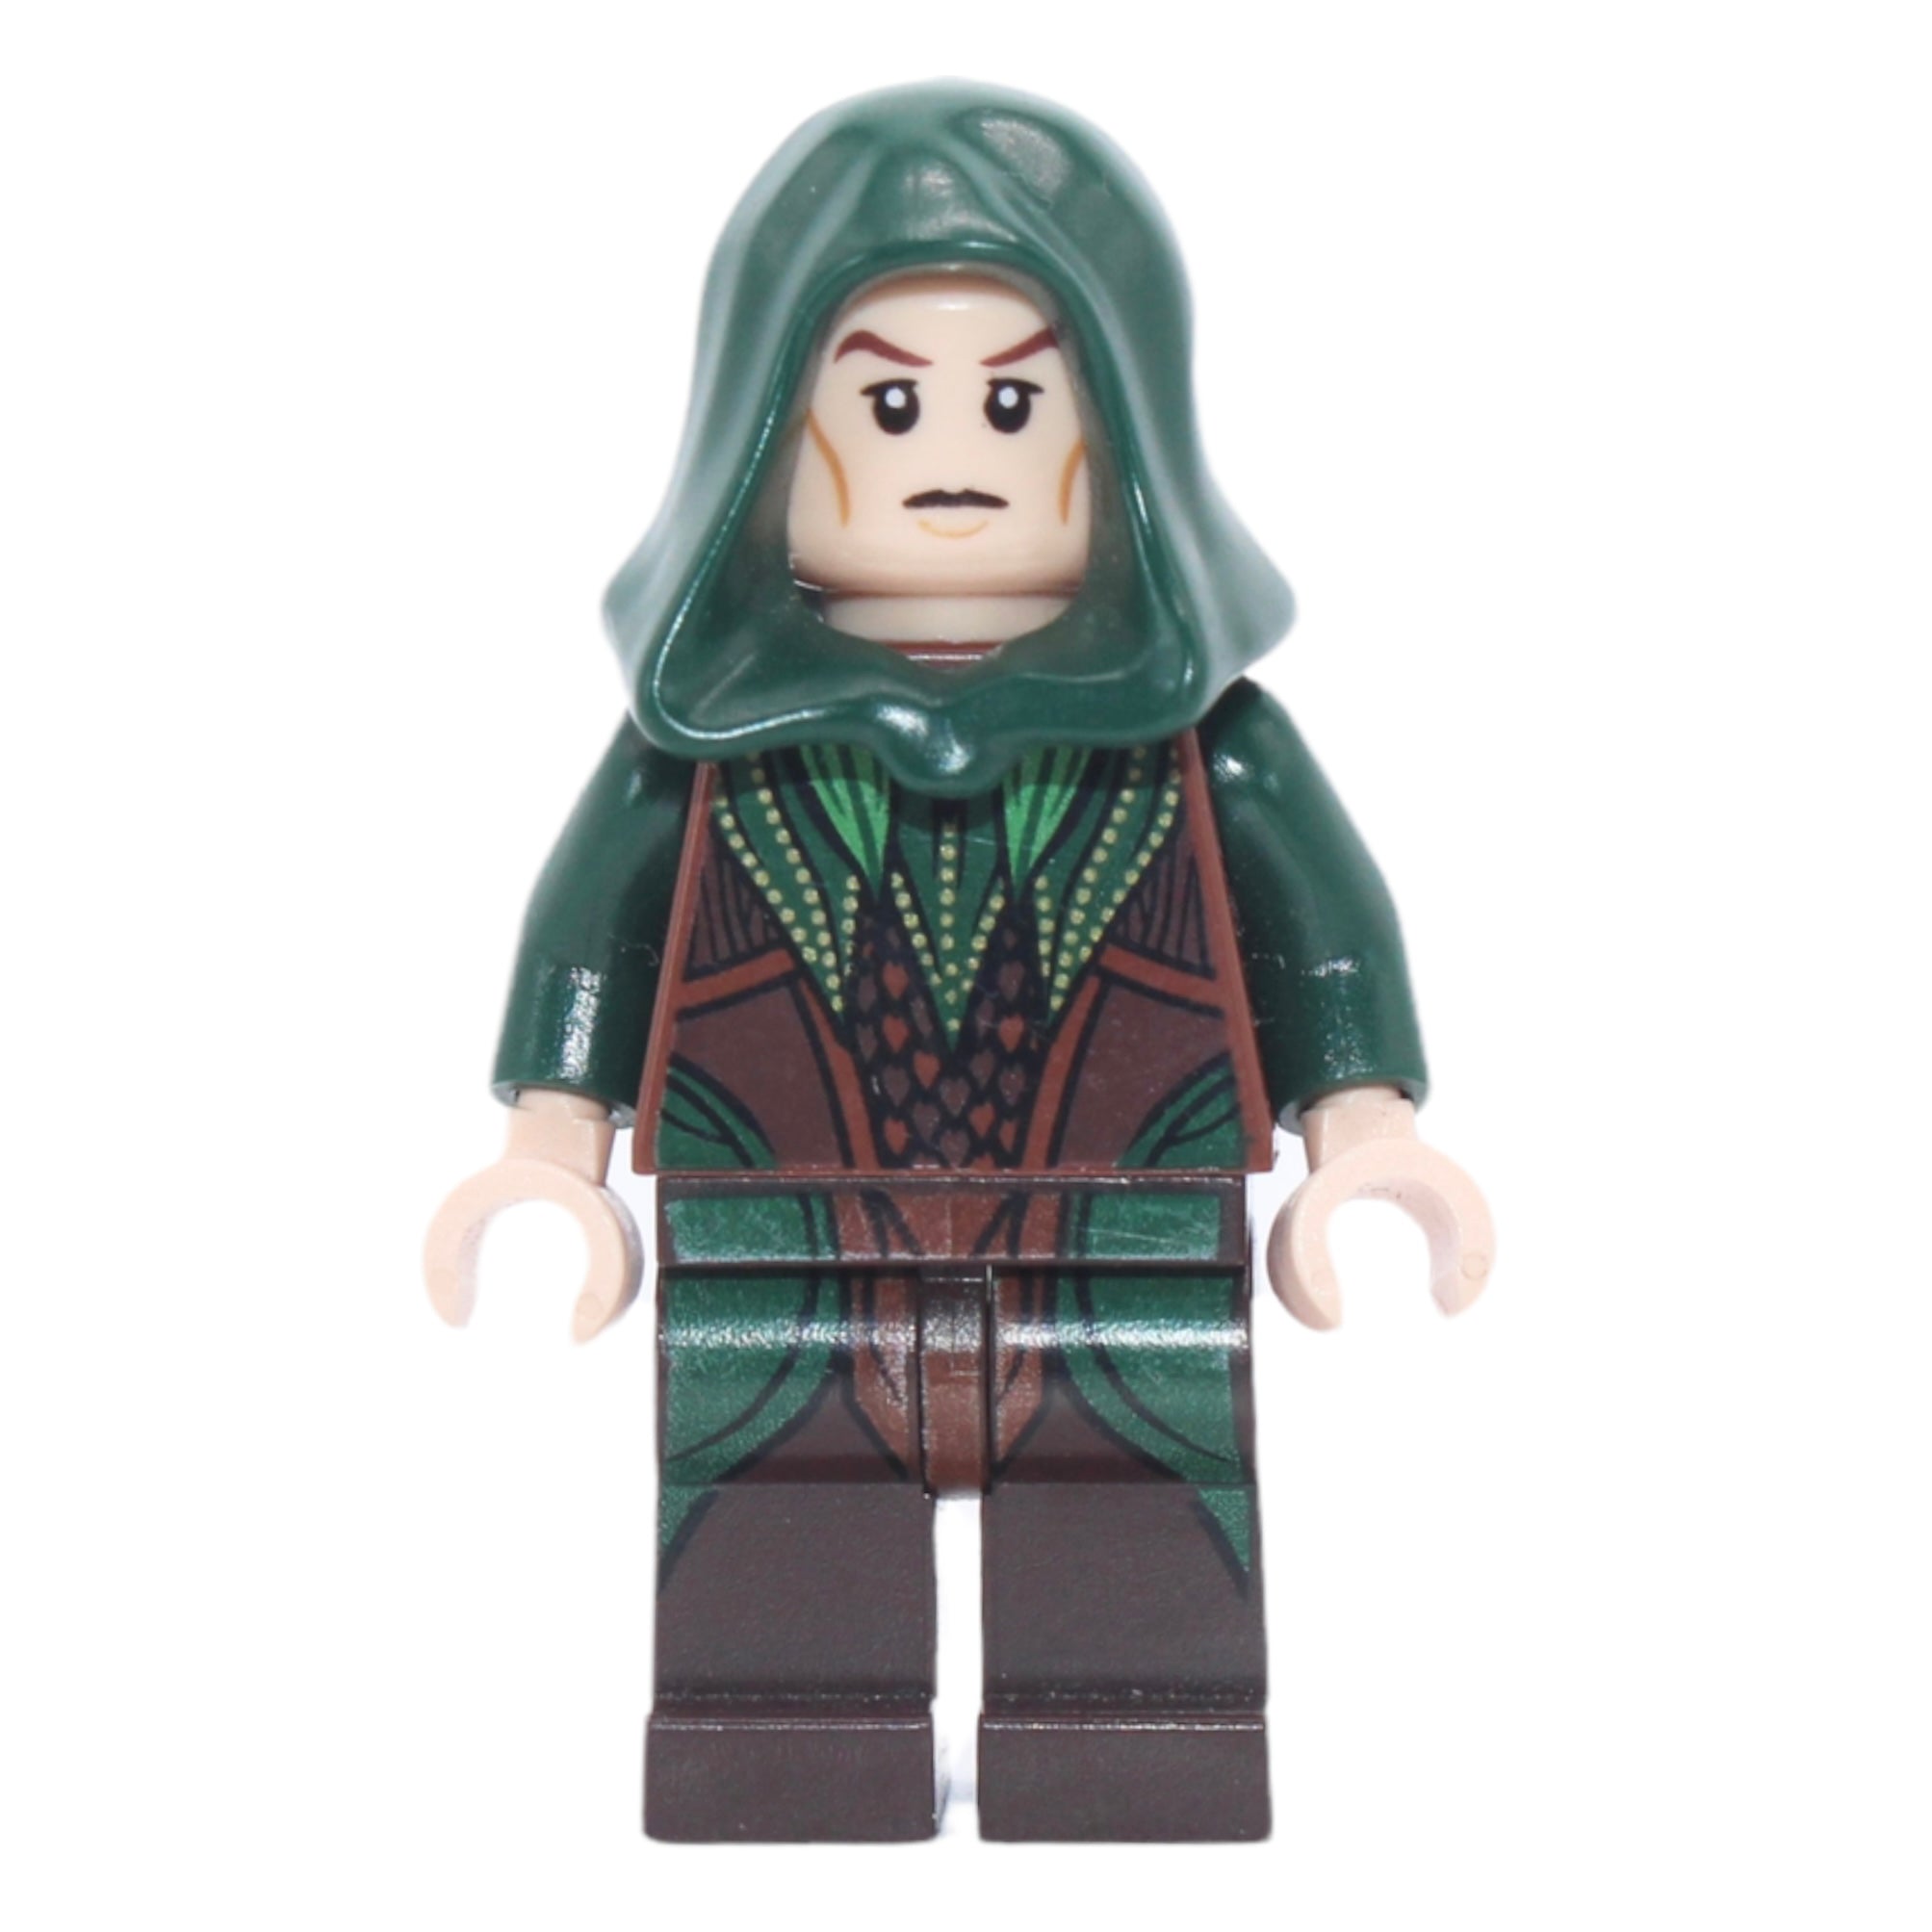 Mirkwood Elf Archer (dark green outfit and hood)